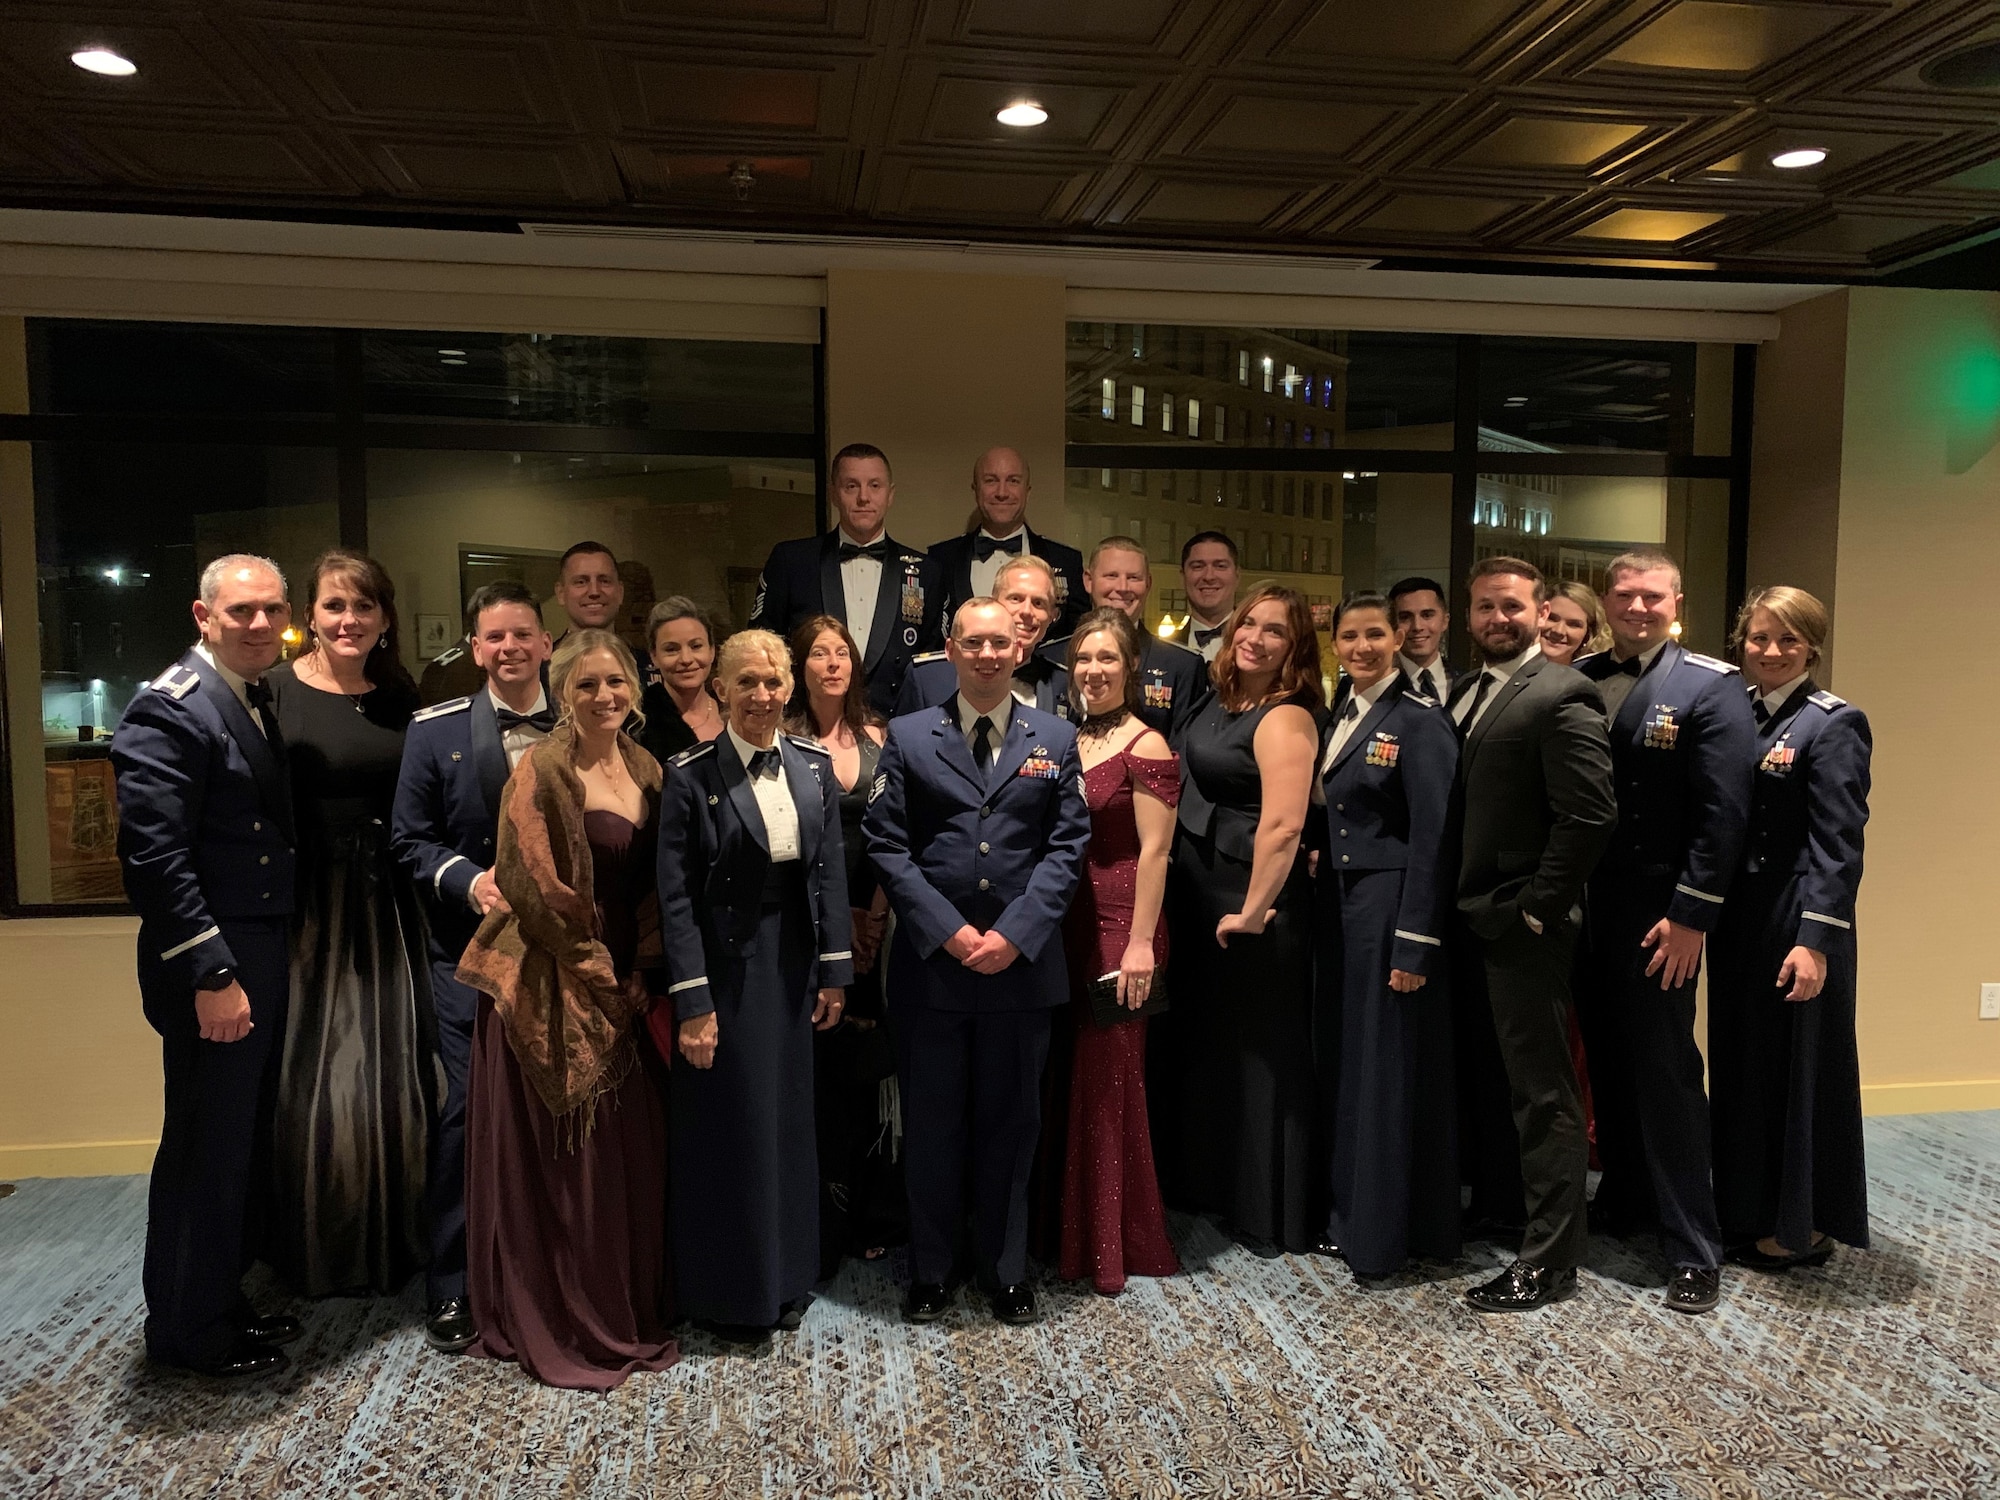 Members of the 491st Attack Squadron and 174th Attack Wing pose for a photo during the Air Force Ball, September 19, 2019, at the Marriot Syracuse Downtown in Syracuse, New York. Members from the 491st ATKS, a geographically separated unit from Holloman Air Force Base, New Mexico, work with Air National Guardsmen from the 174th ATKW on Hancock Field Air National Guard Base, NY, conducting daily MQ-9 Reaper operations, exercises and training. (Courtesy photo)